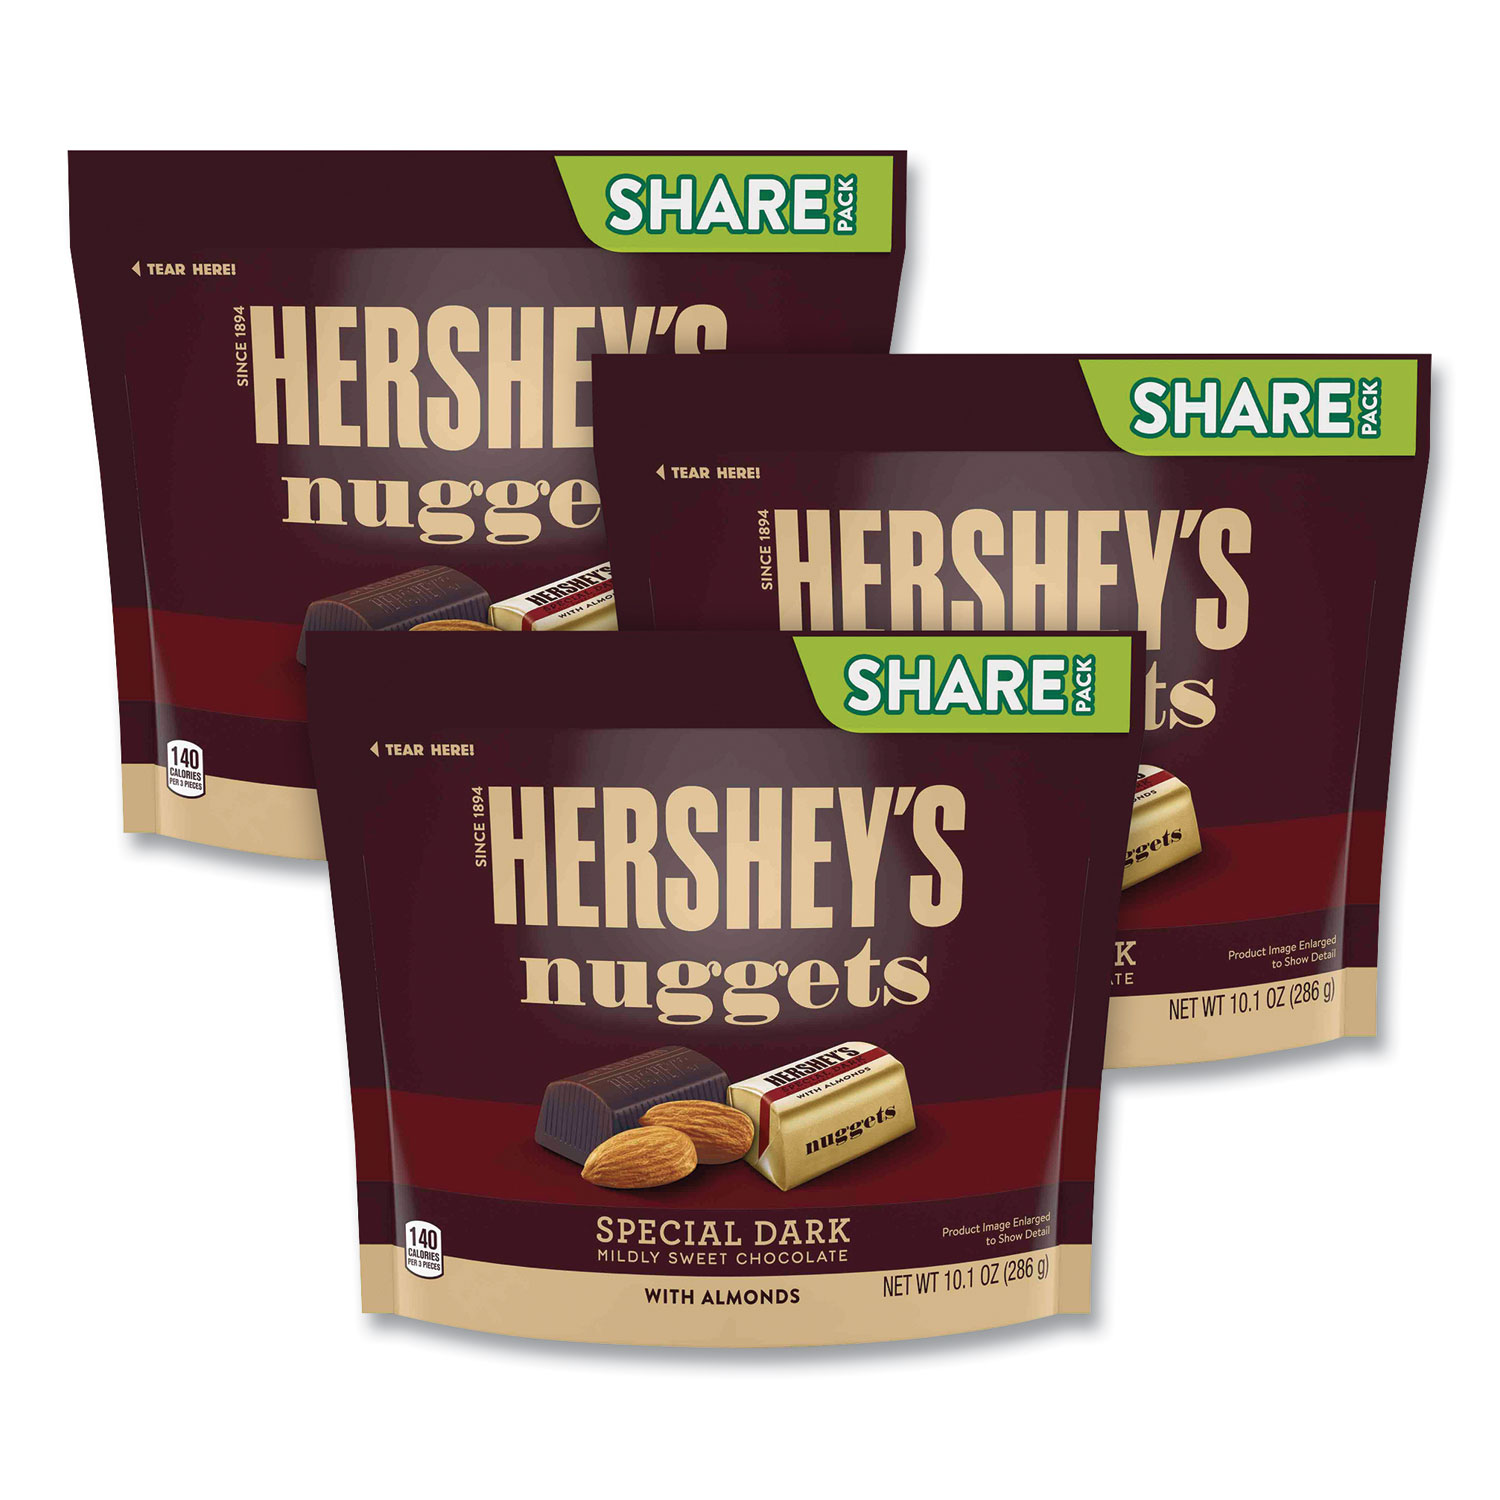  Hershey's 1874 Nuggets Share Pack, Special Dark with Almonds, 10.1 oz Bag, 3/Pack, Free Delivery in 1-4 Business Days (GRR24600444) 